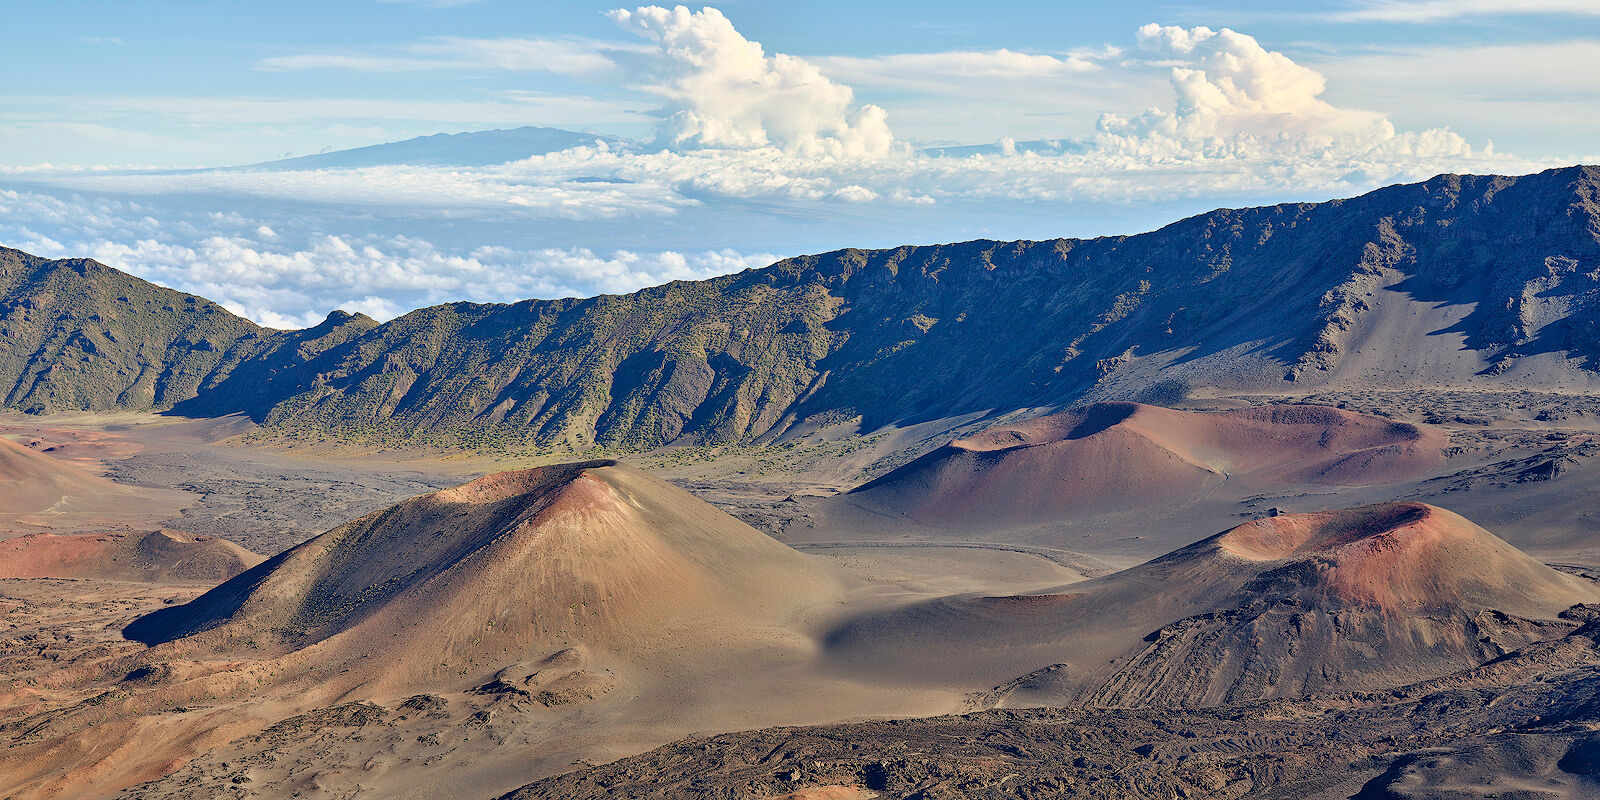 looking across Haleakala crater on the island of Maui with cinder cones in the foreground.  Mauna Loa and Mauna Kea can be seen in the distance miles away